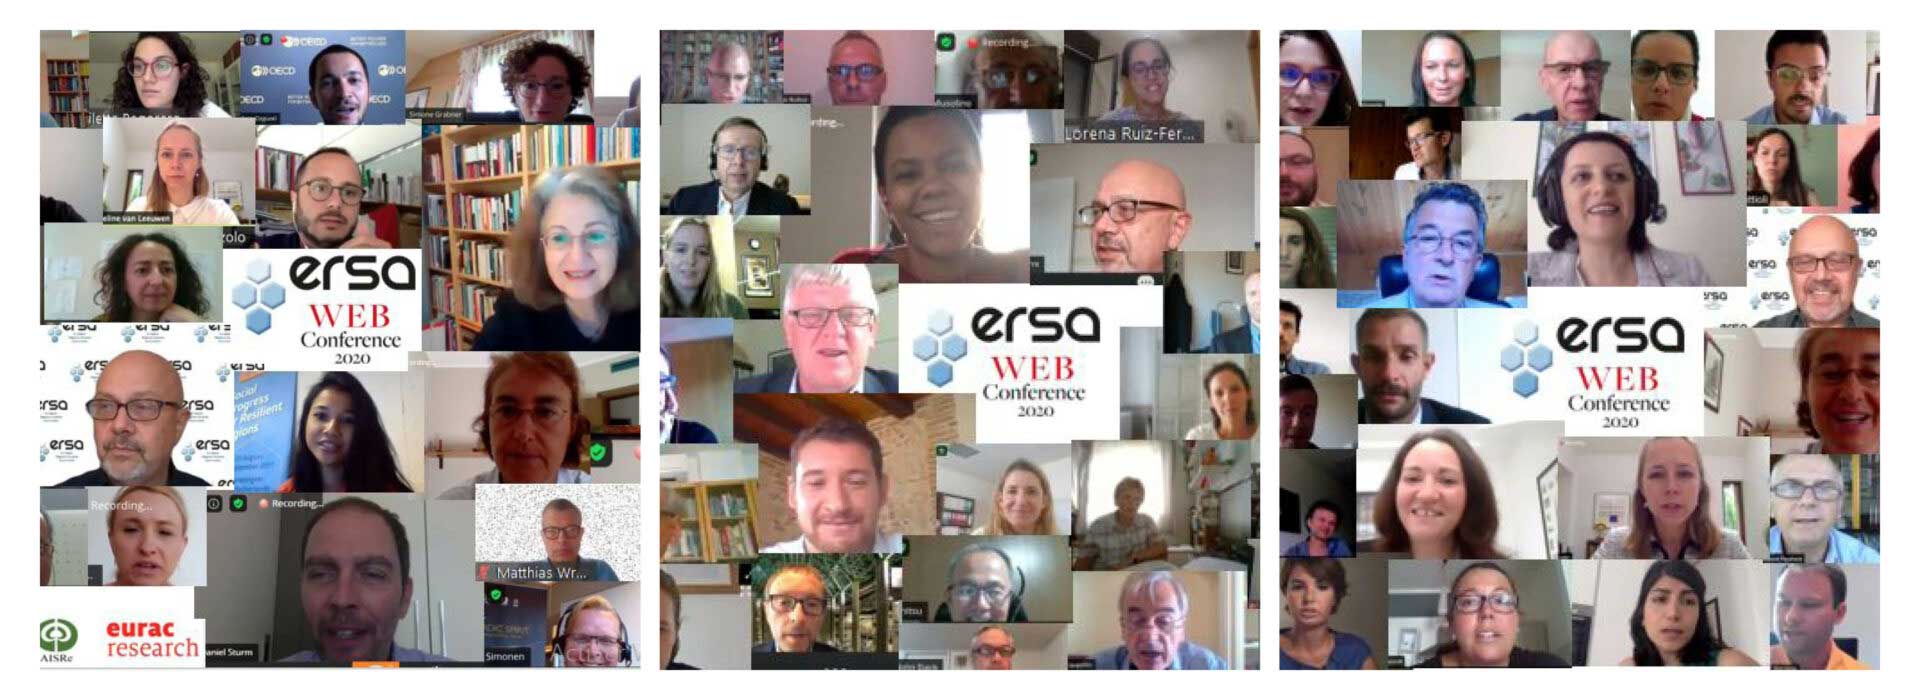 Participation at the ERSA Web Conference 2020